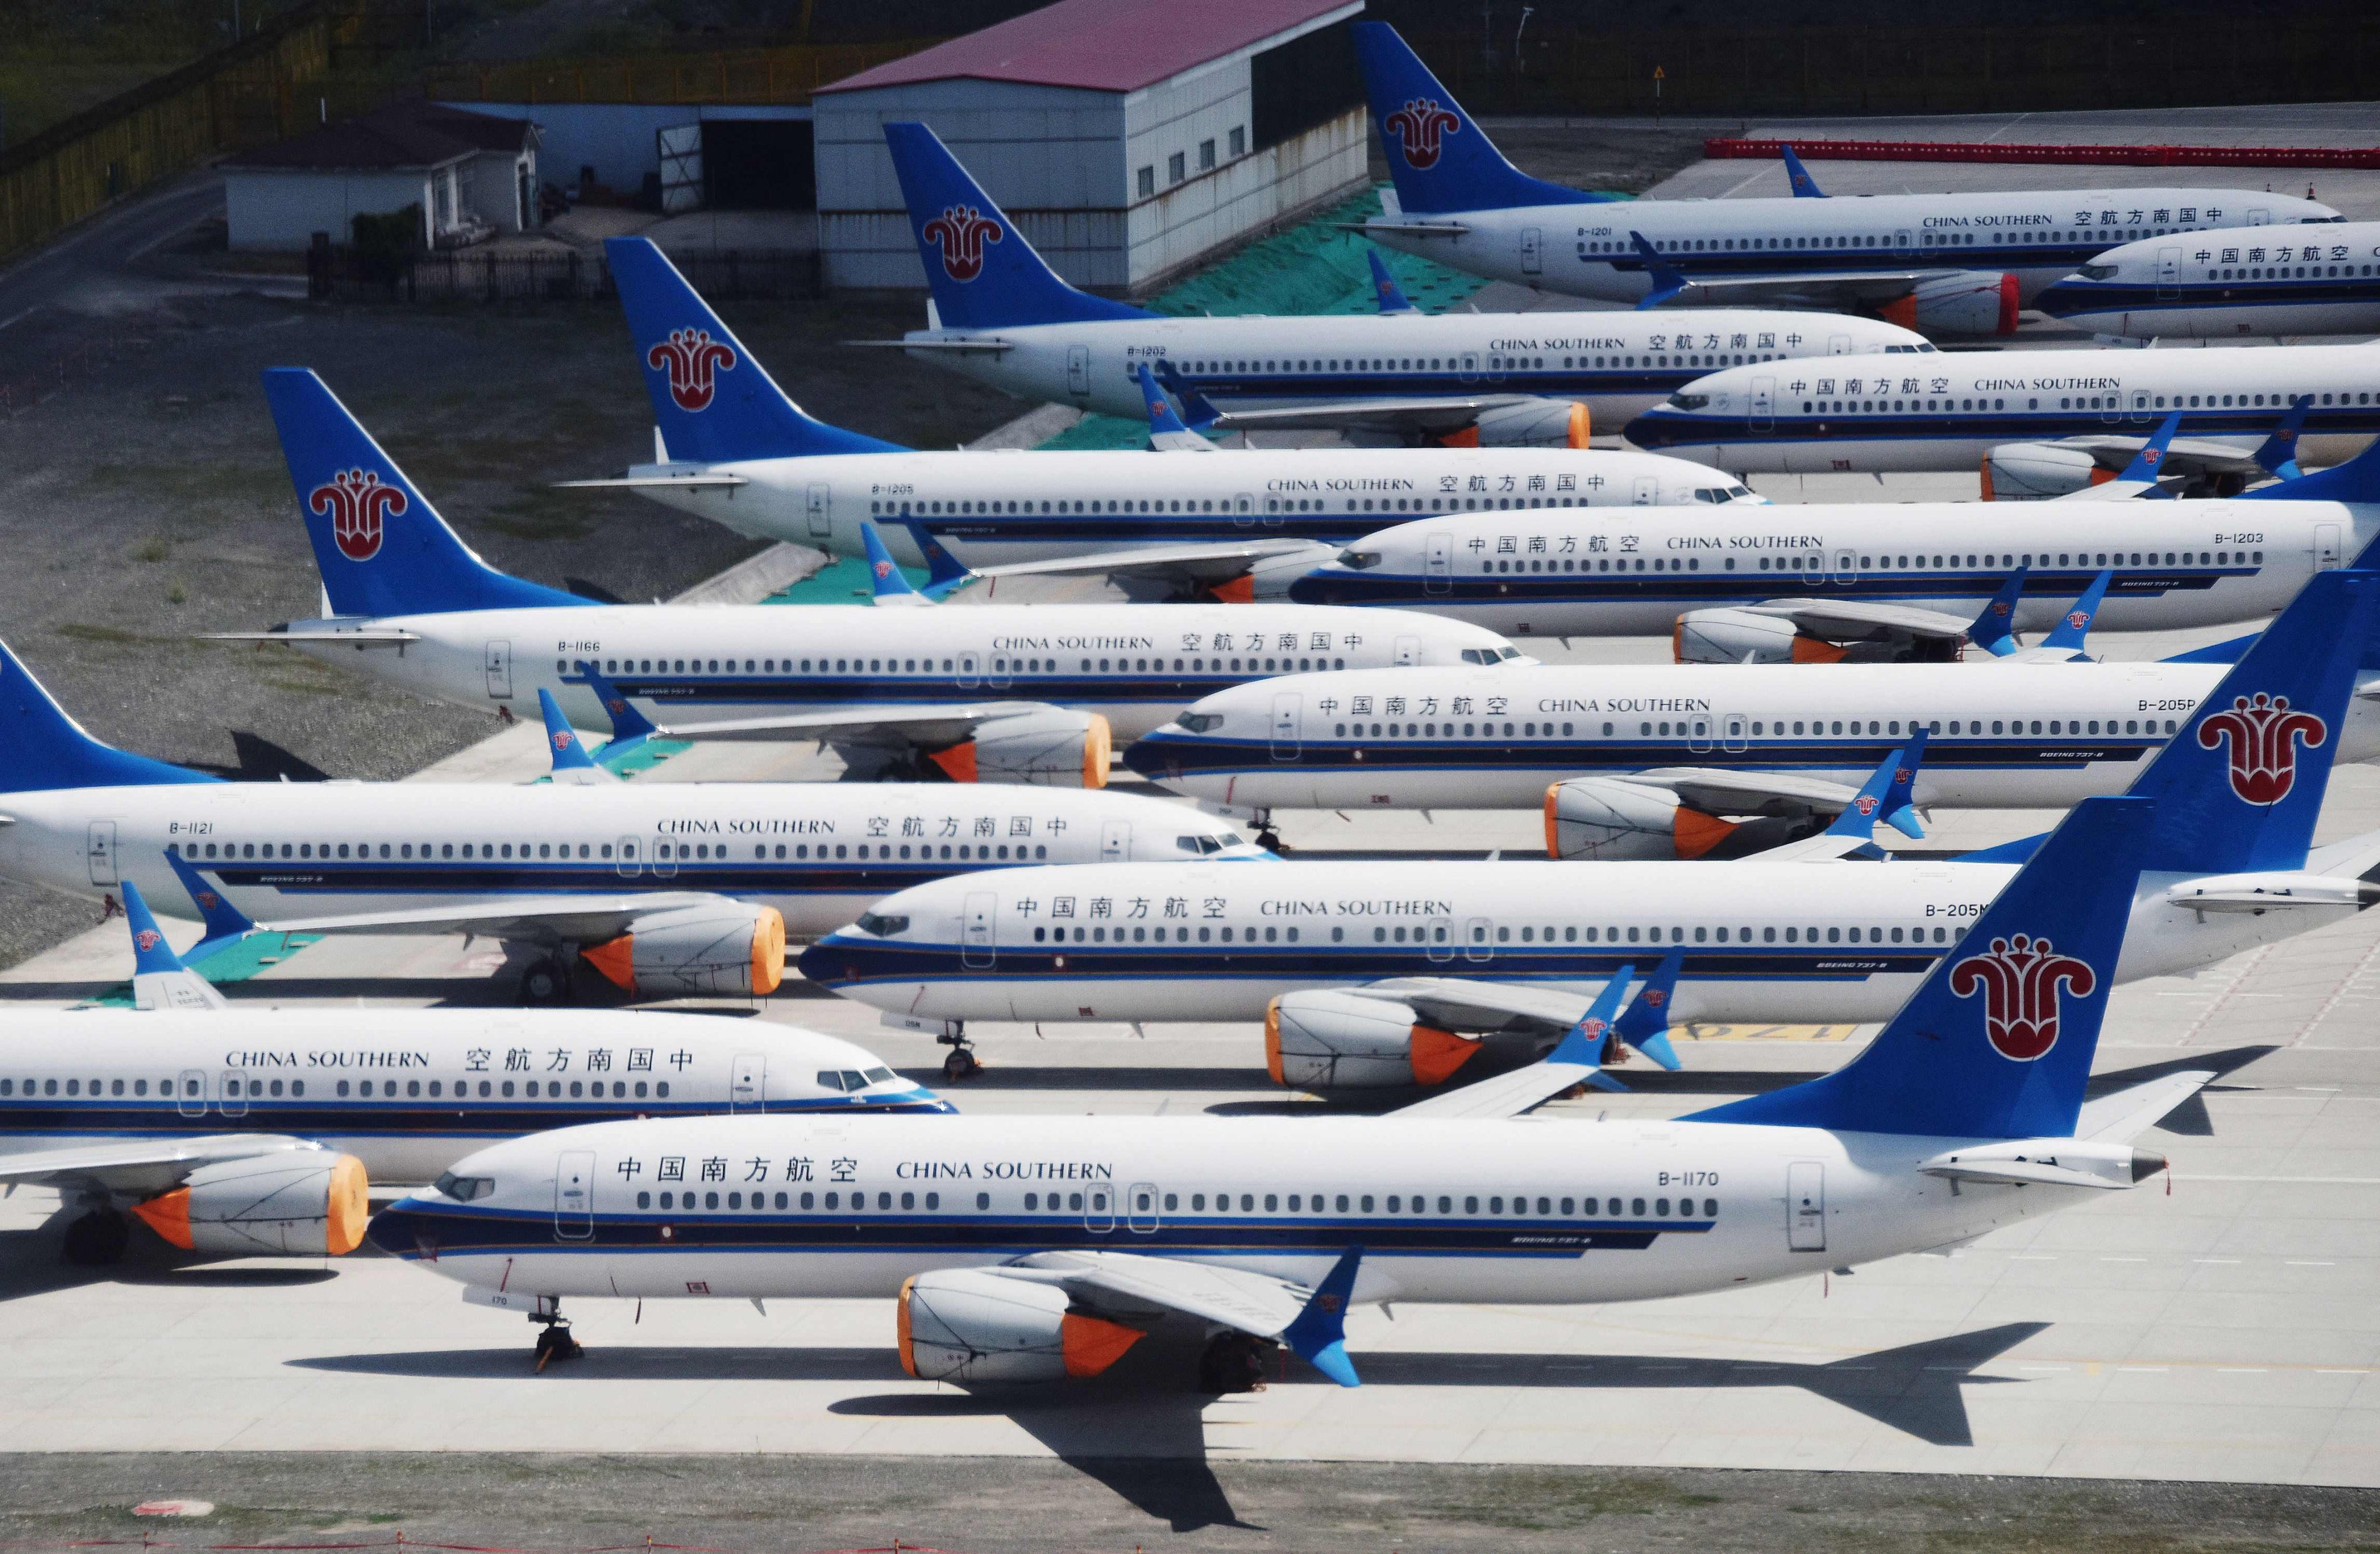 China Southern Airlines Boeing 737 MAX aircraft parked at Urumqi airport in China’s Xinjiang Uygur autonomous region. Photo: AFP